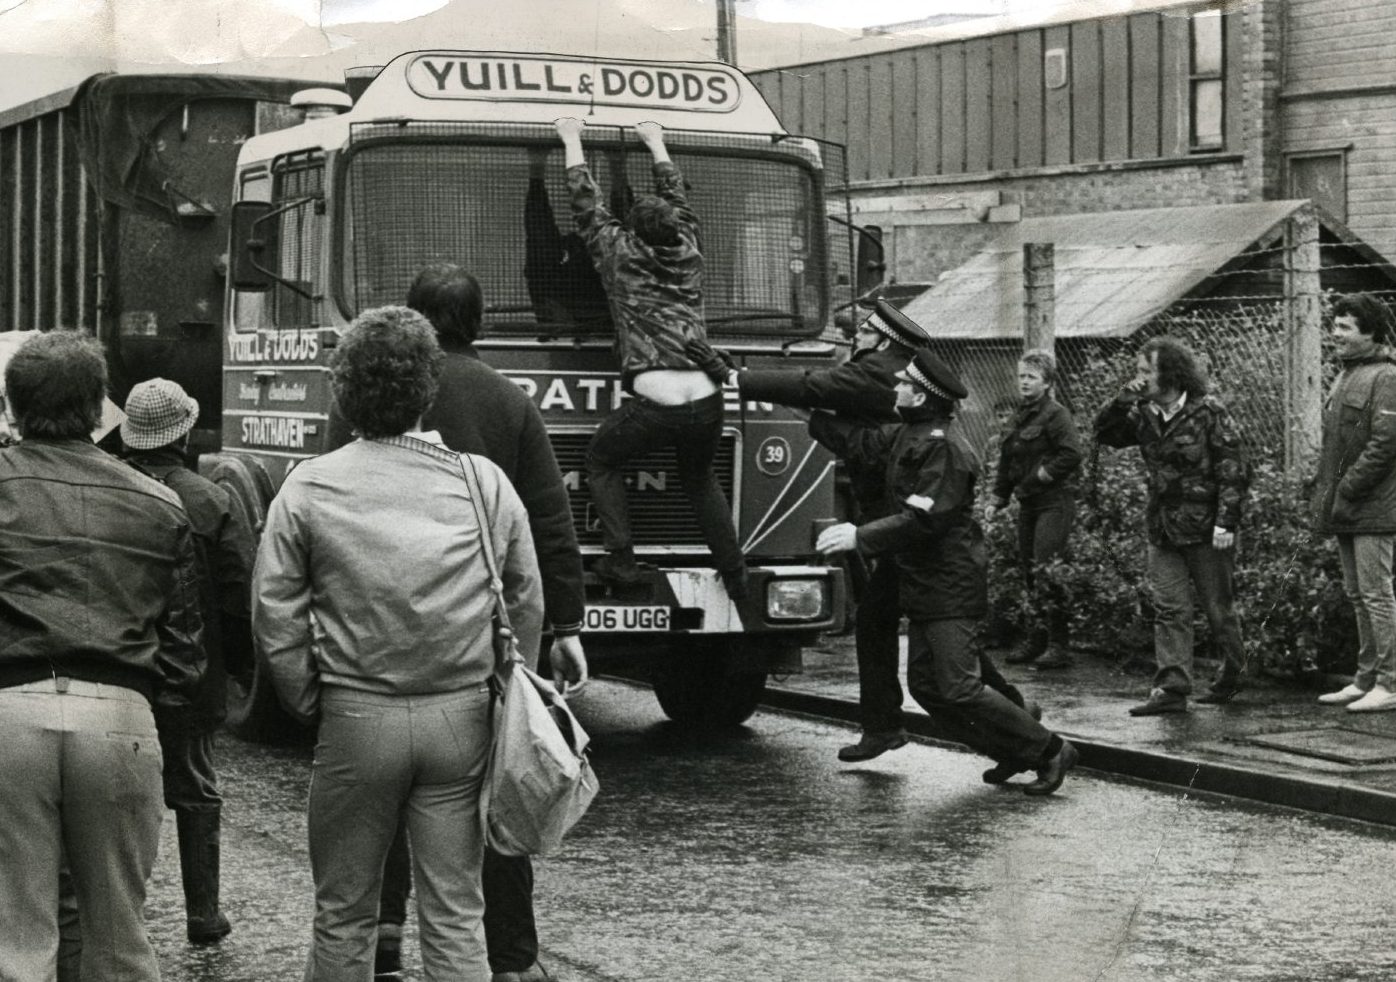 Pickets at Cartmore site in Dunfermline during the miners' strike in June 1984, with one man clinging to the front of a coal lorry 